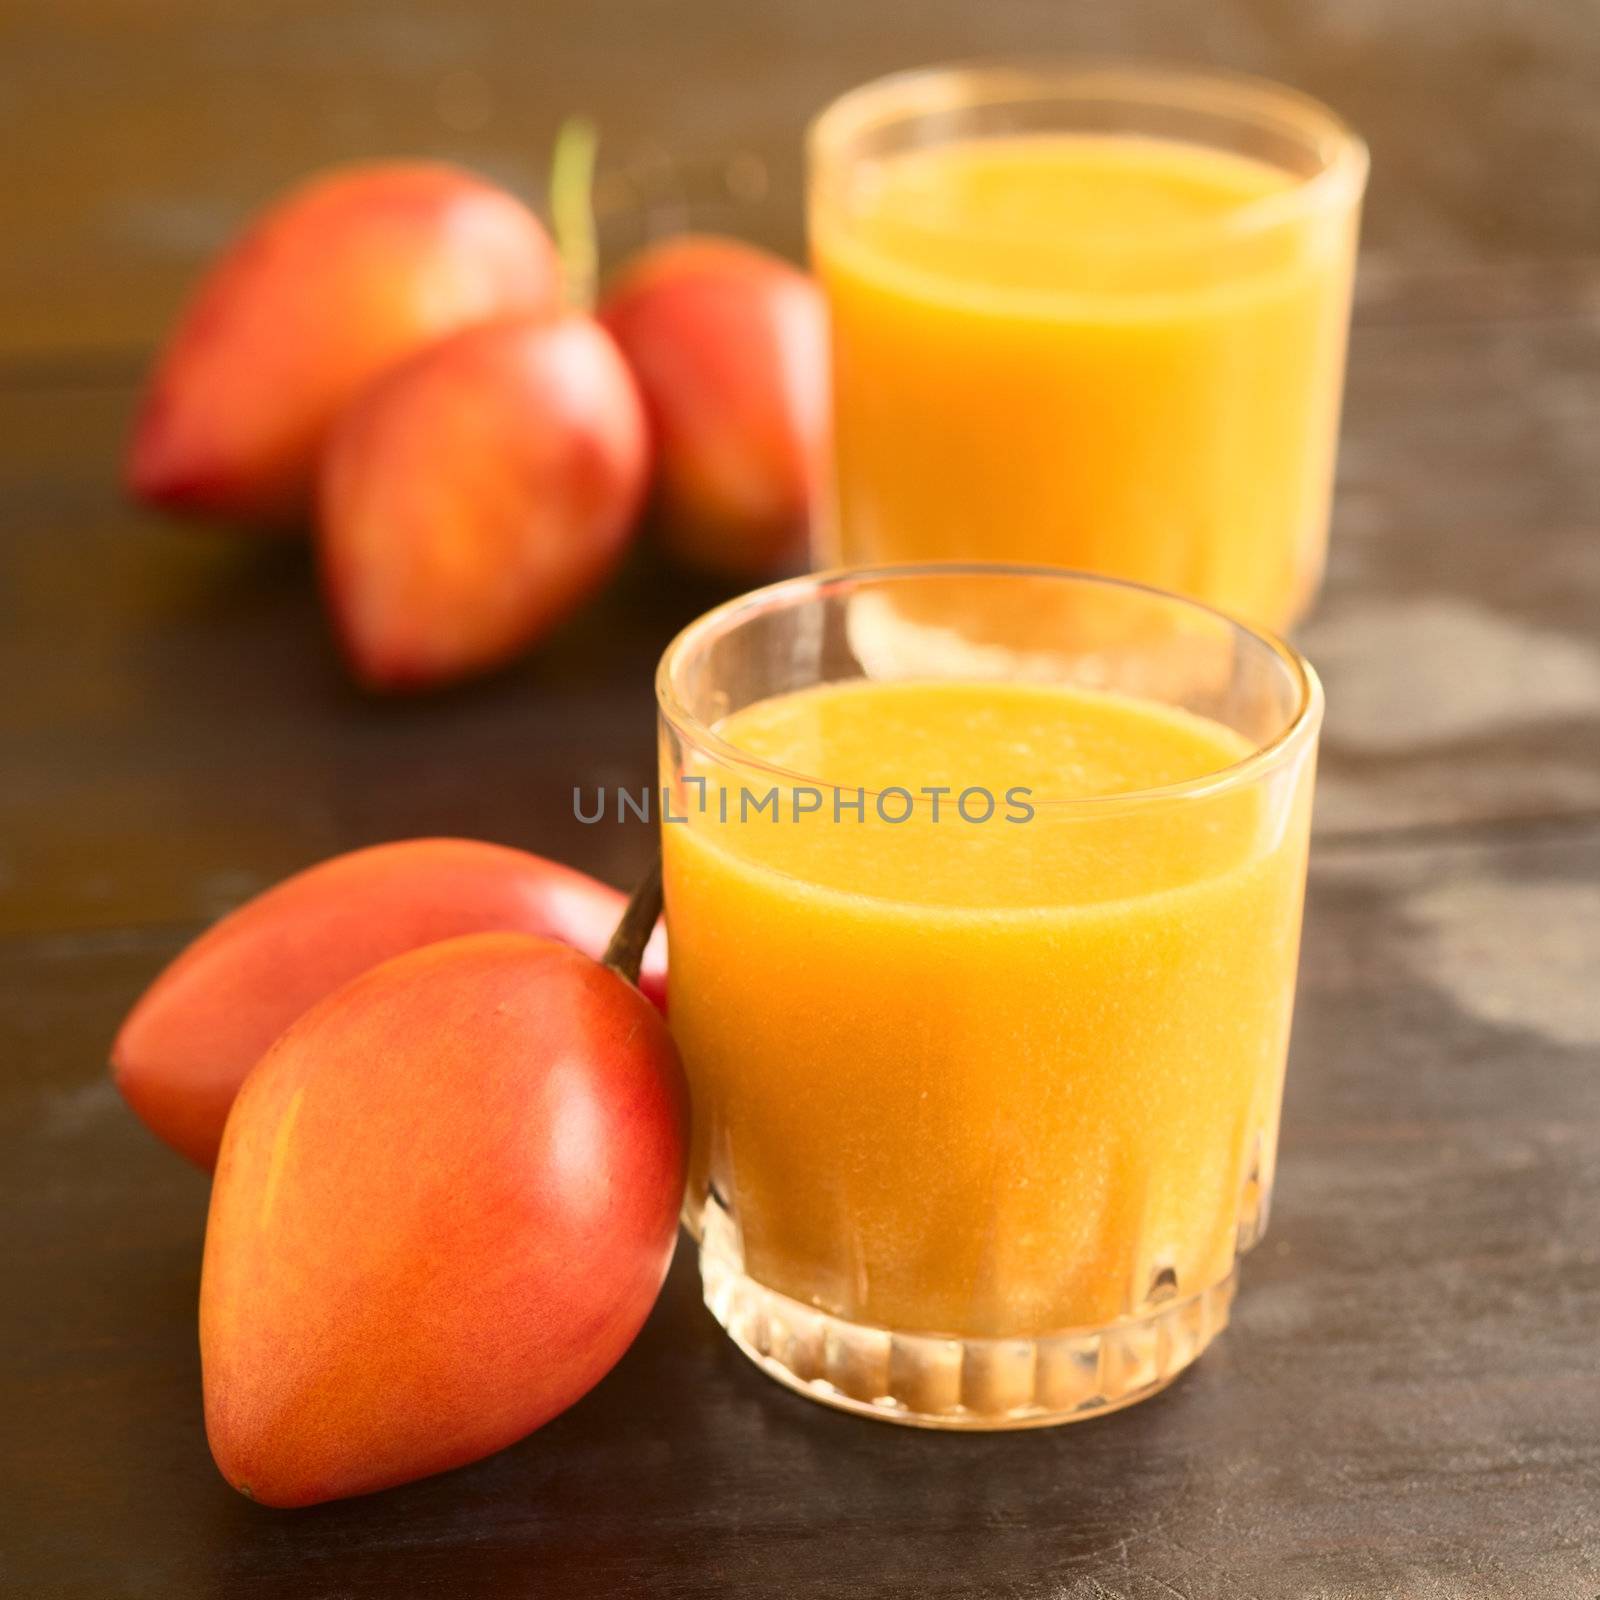 Freshly prepared tamarillo juice in glass with tamarillo (lat. Solanum betaceum) fruits beside (Selective Focus, Focus on the front rim of the glass)